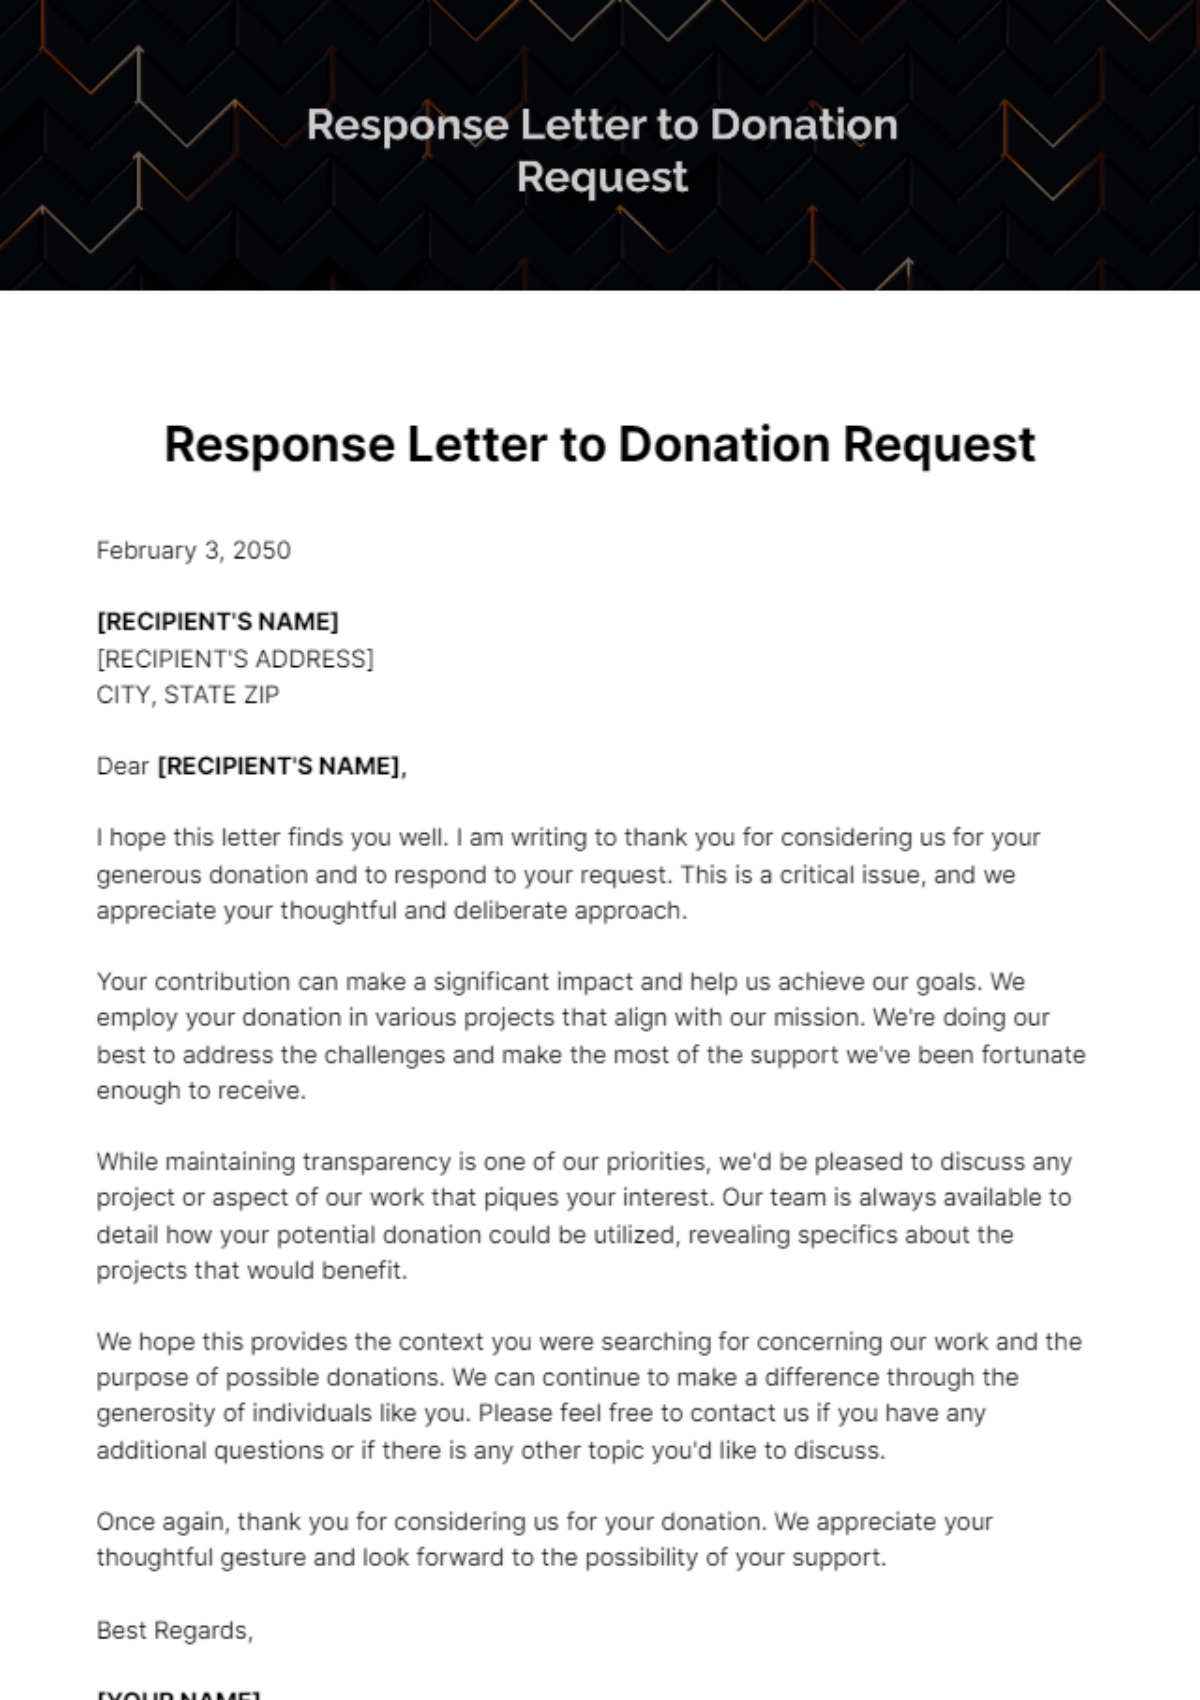 Response Letter to Donation Request Template